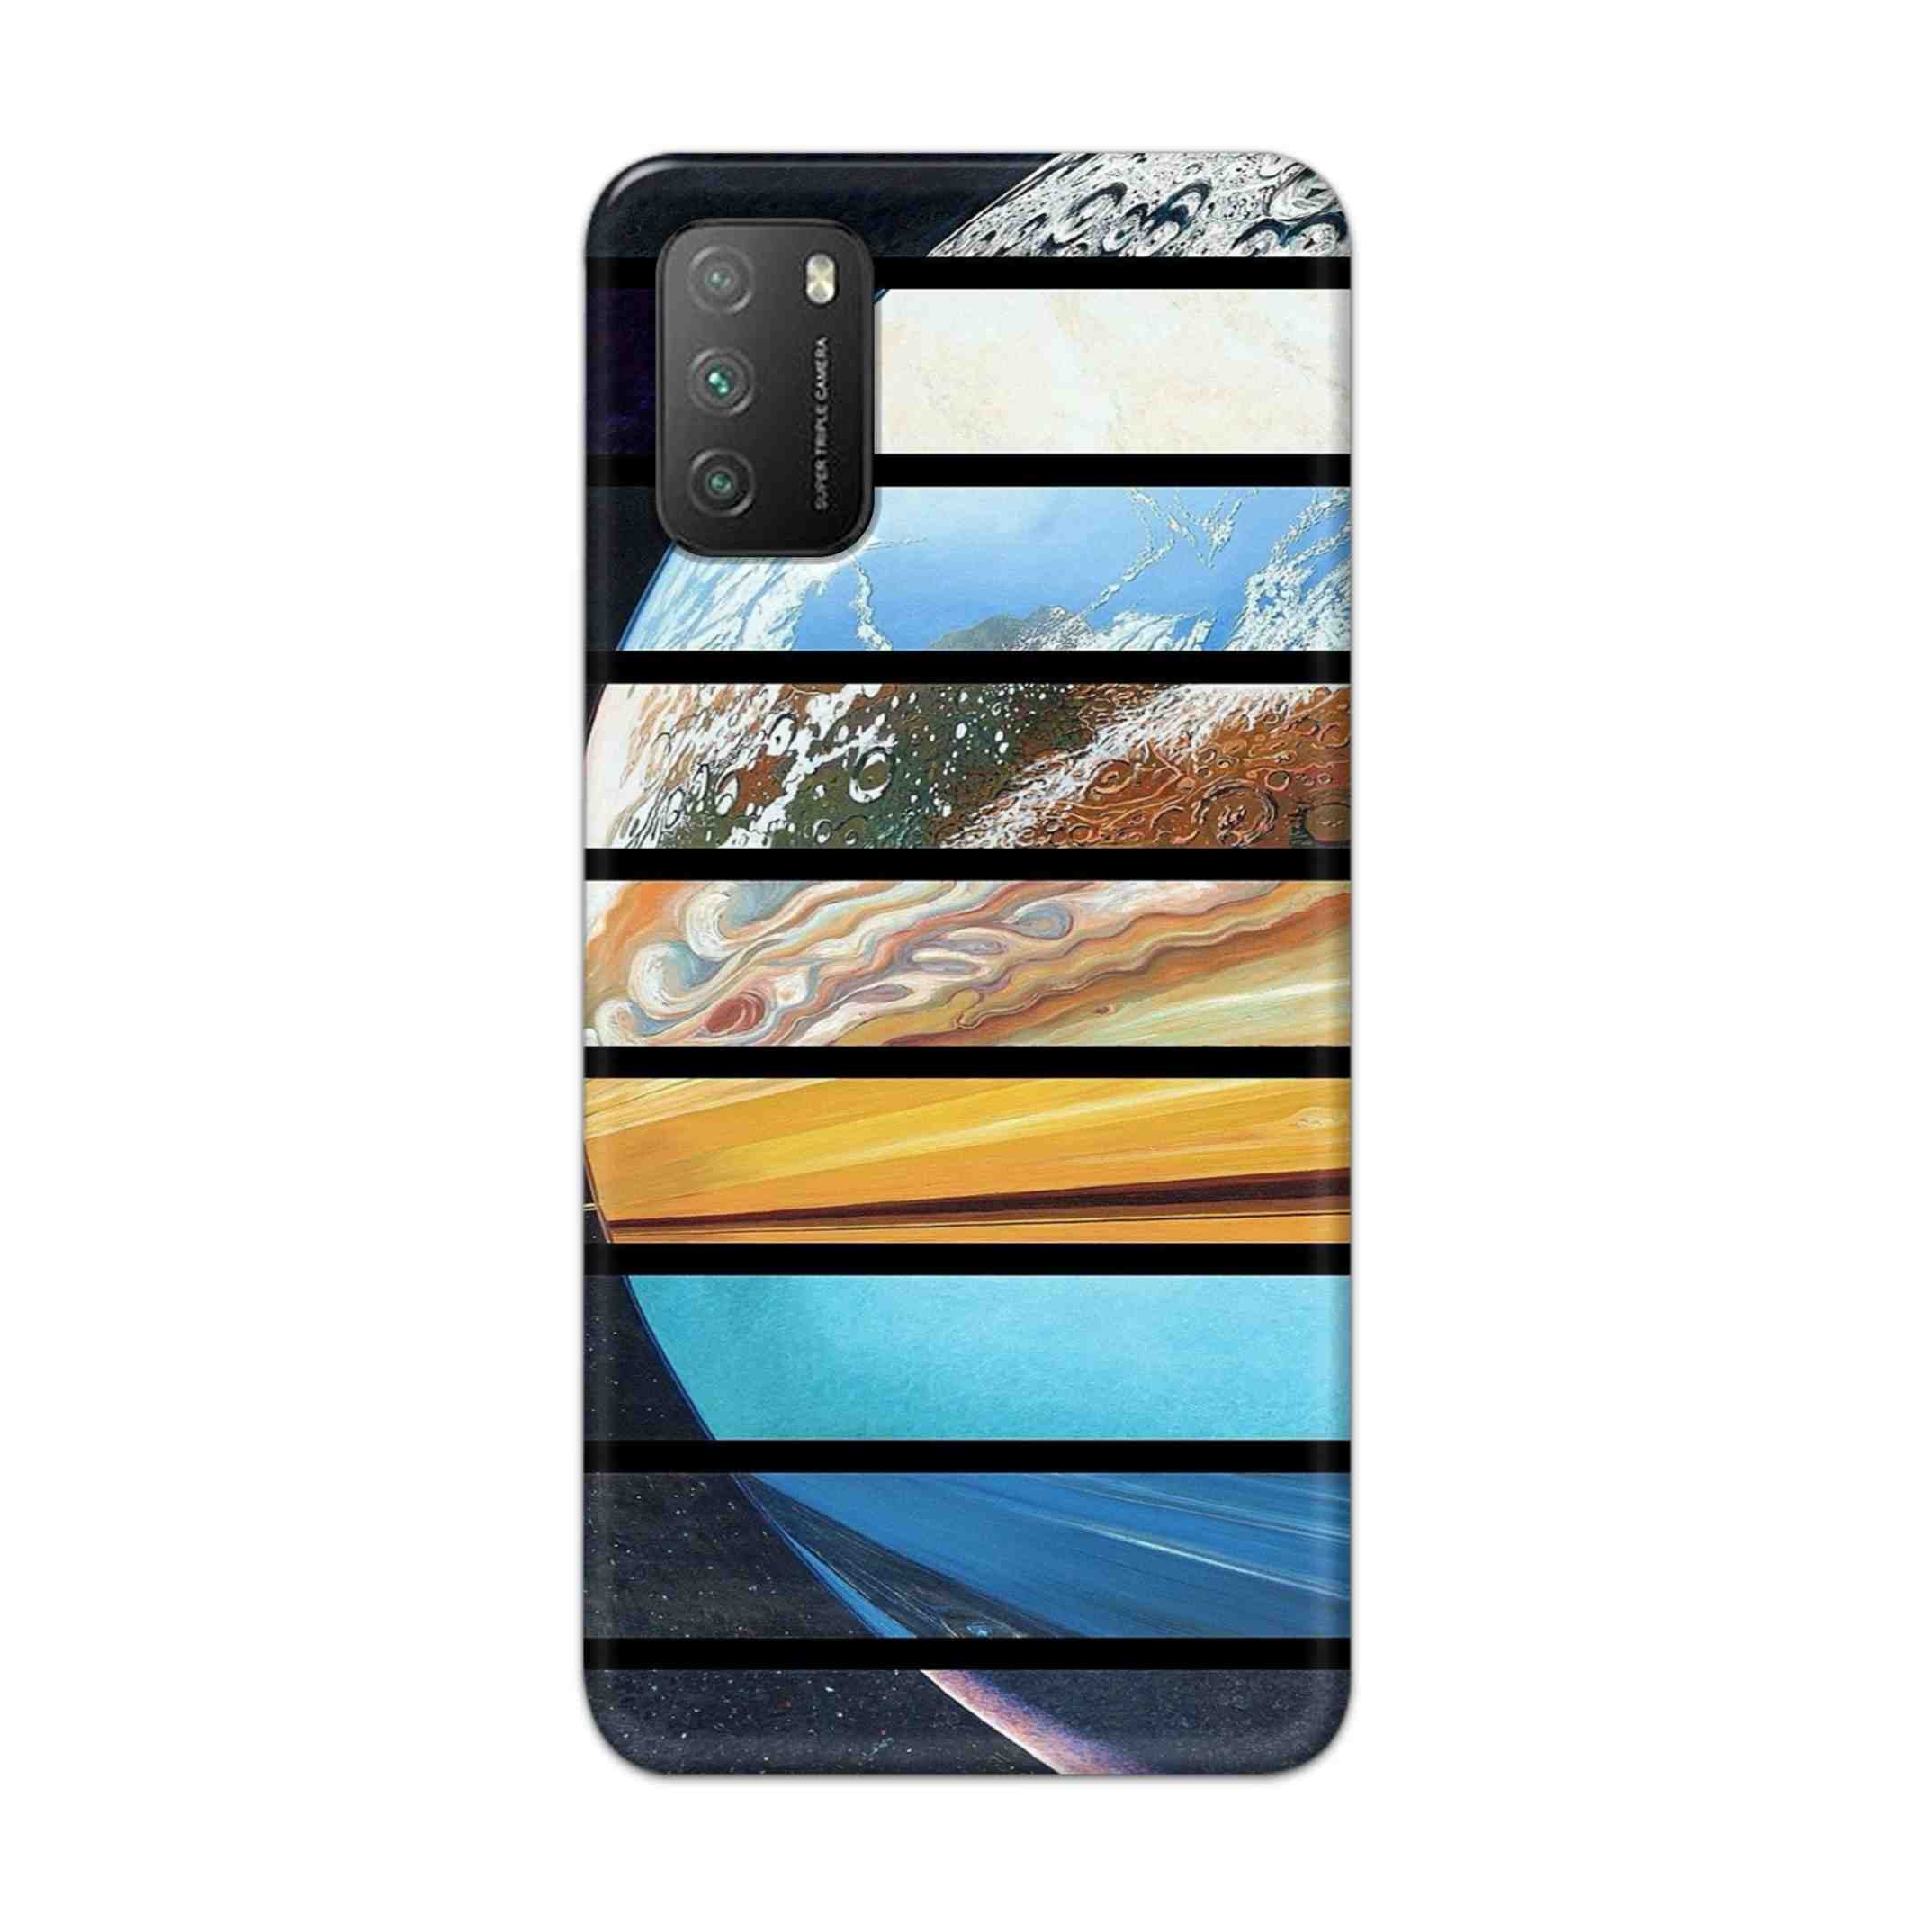 Buy Colourful Earth Hard Back Mobile Phone Case Cover For Poco M3 Online